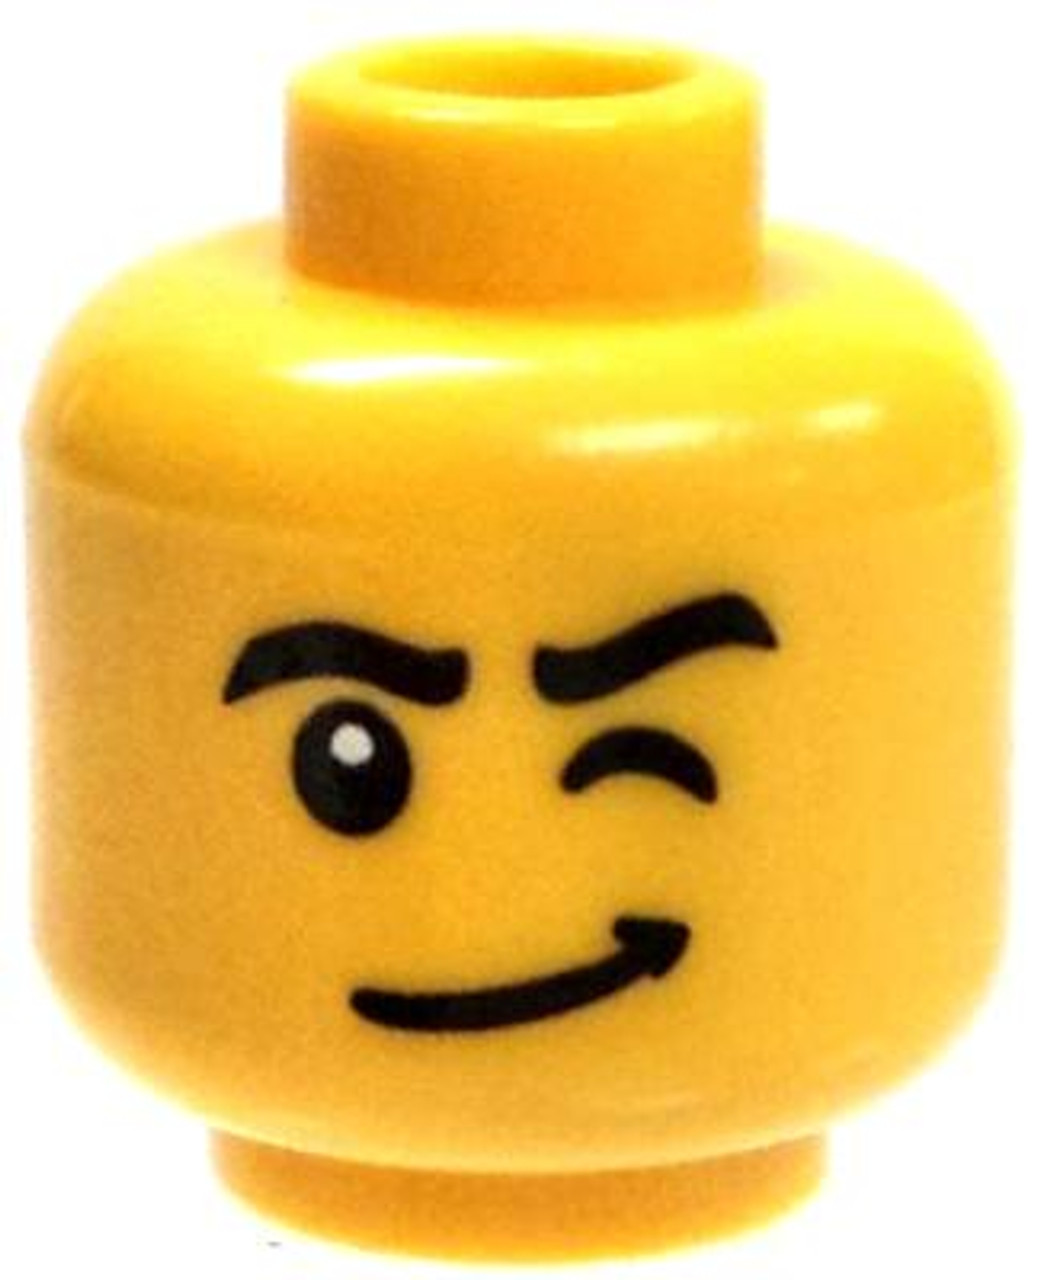 Lego Lego Minifigure Parts Grinning Winking With Raised Eyebrow Minifigure Head Yellow Male Loose Toywiz - 𝐎𝐑𝐈𝐆𝐈𝐍𝐀𝐋 p wink tongue out face emoji roblox